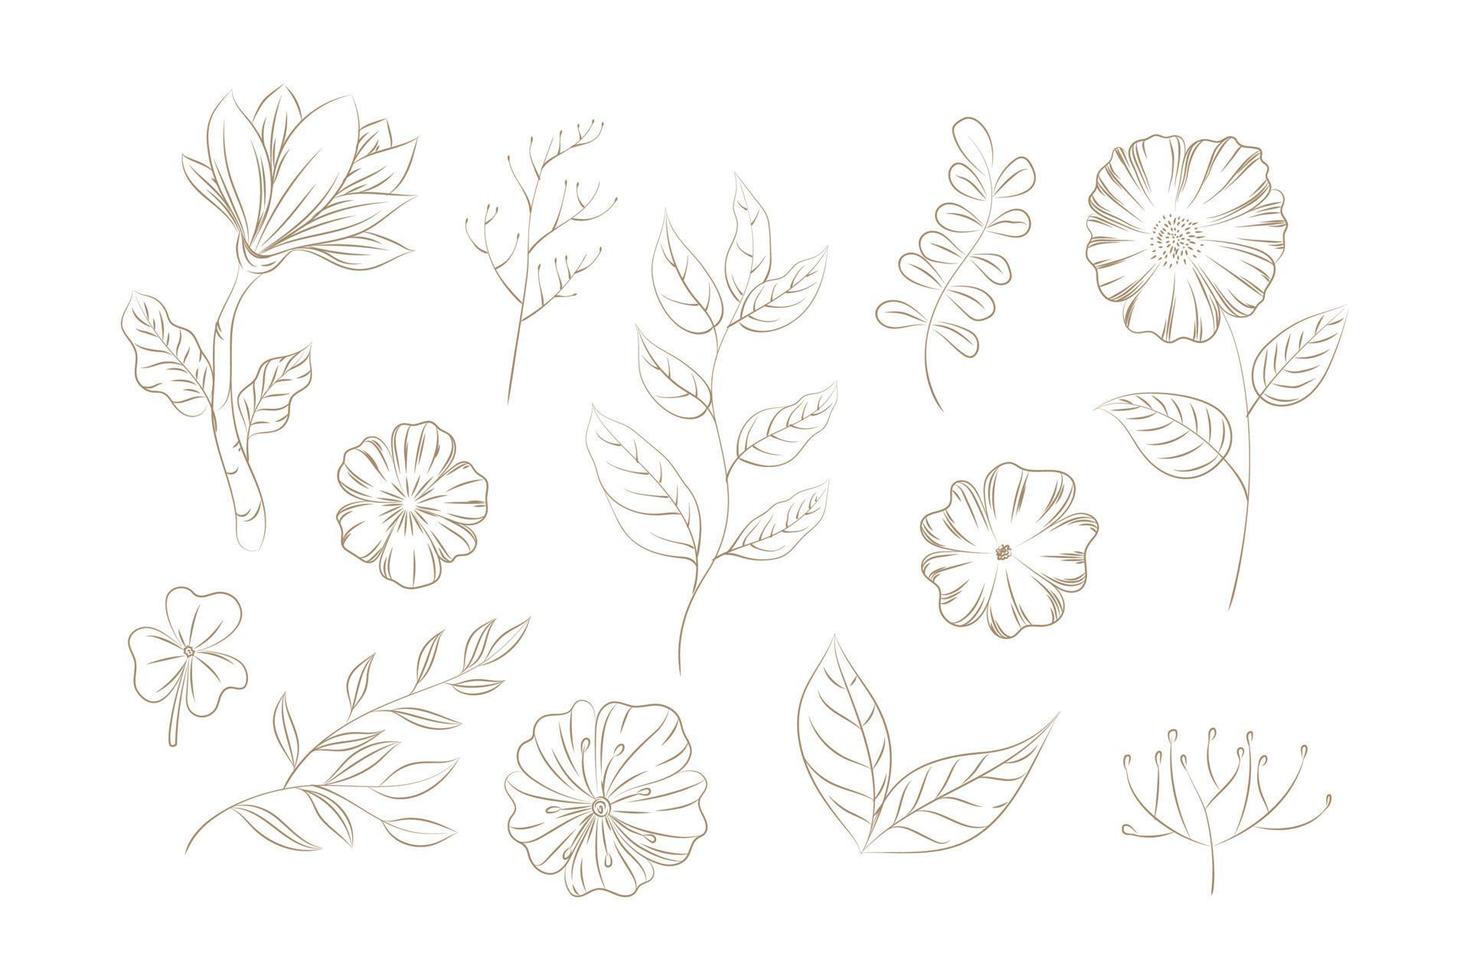 oodles Herbs and flowers, set of hand-drawn flowers, floral set of wildflowers and herbs, vector objects isolated on a white background. One Line Drawing Vector Flowers Print Set. Botanical